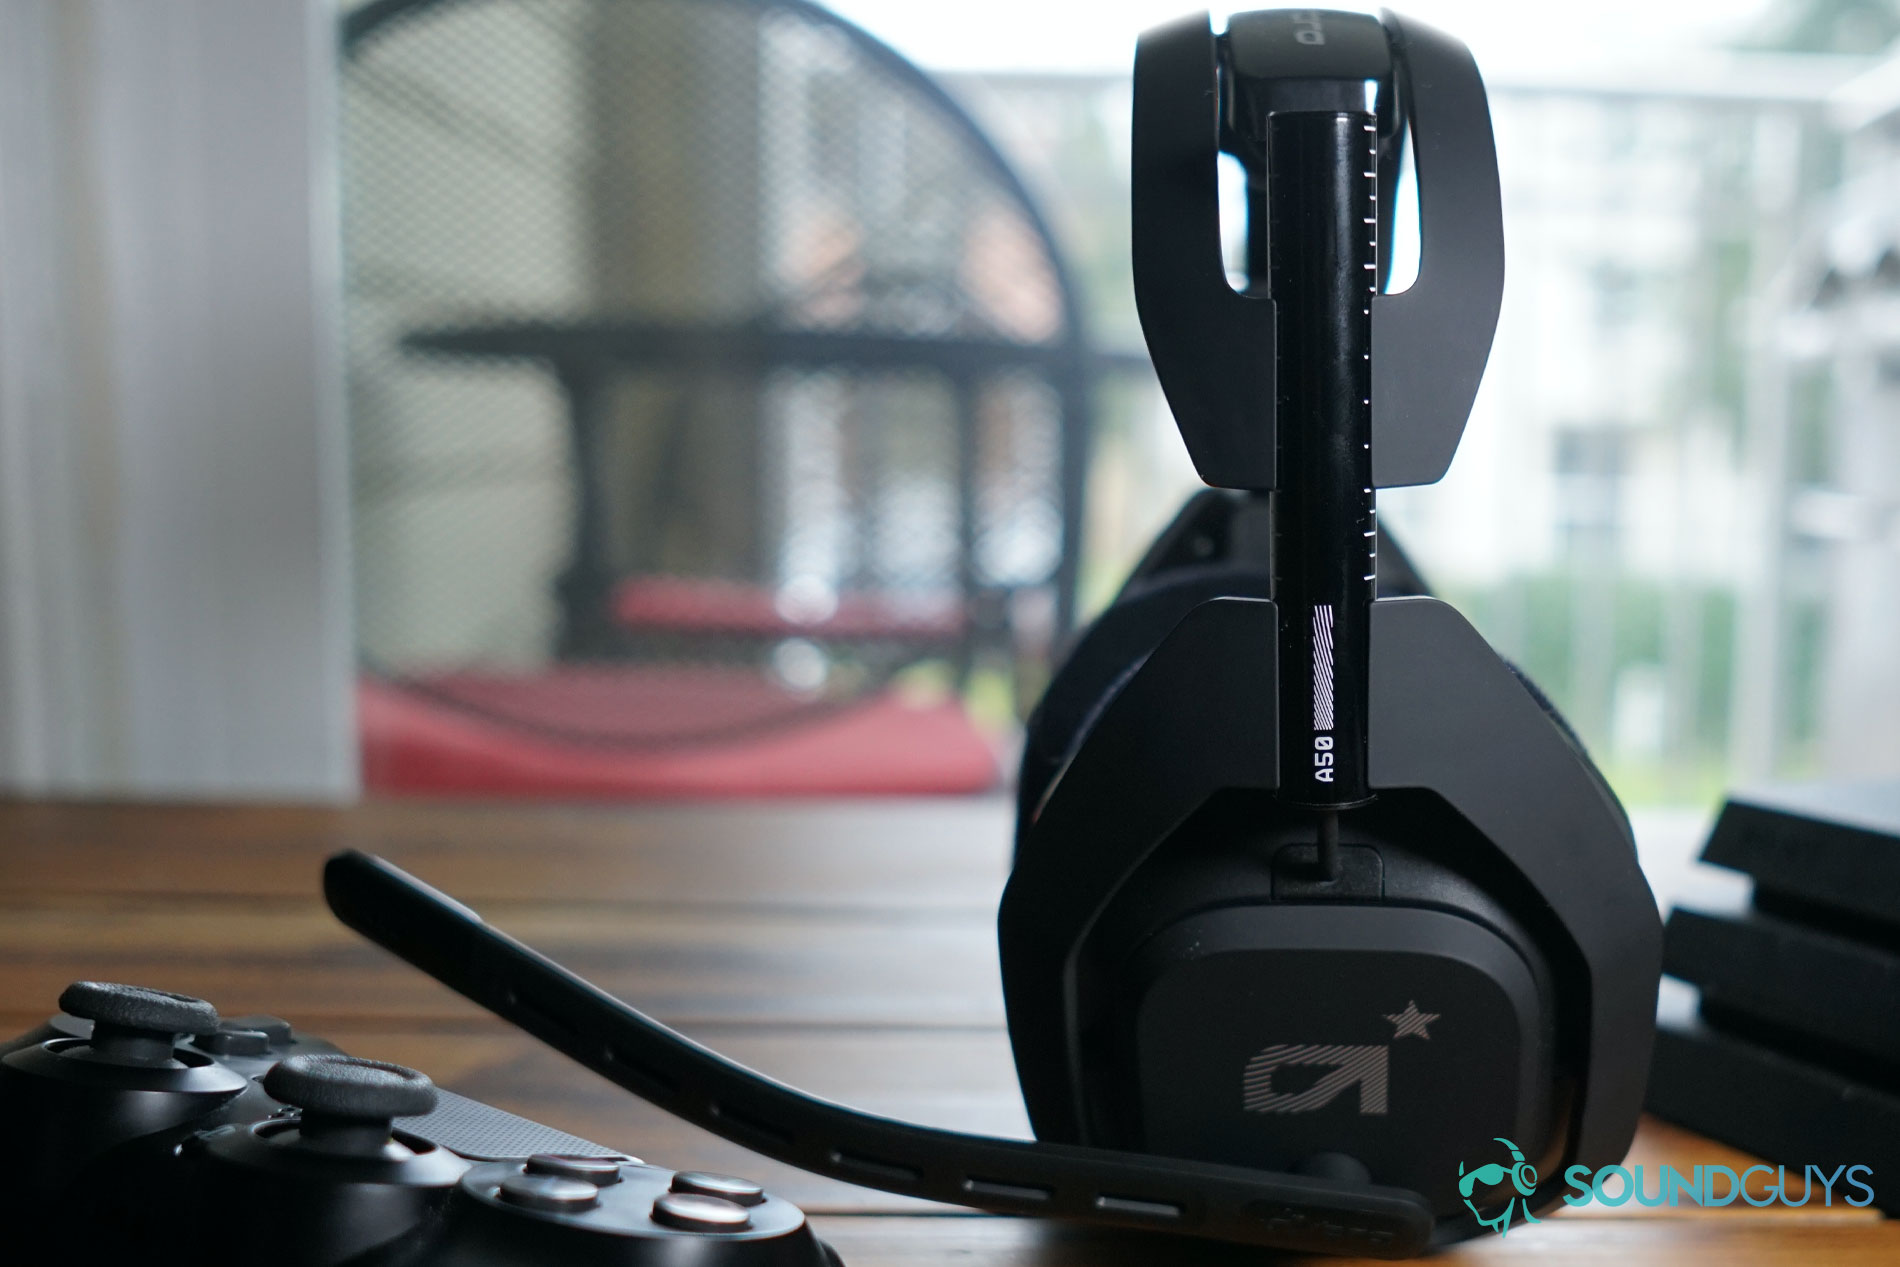 Astro's new A50 model solves the big problem with wireless gaming headsets